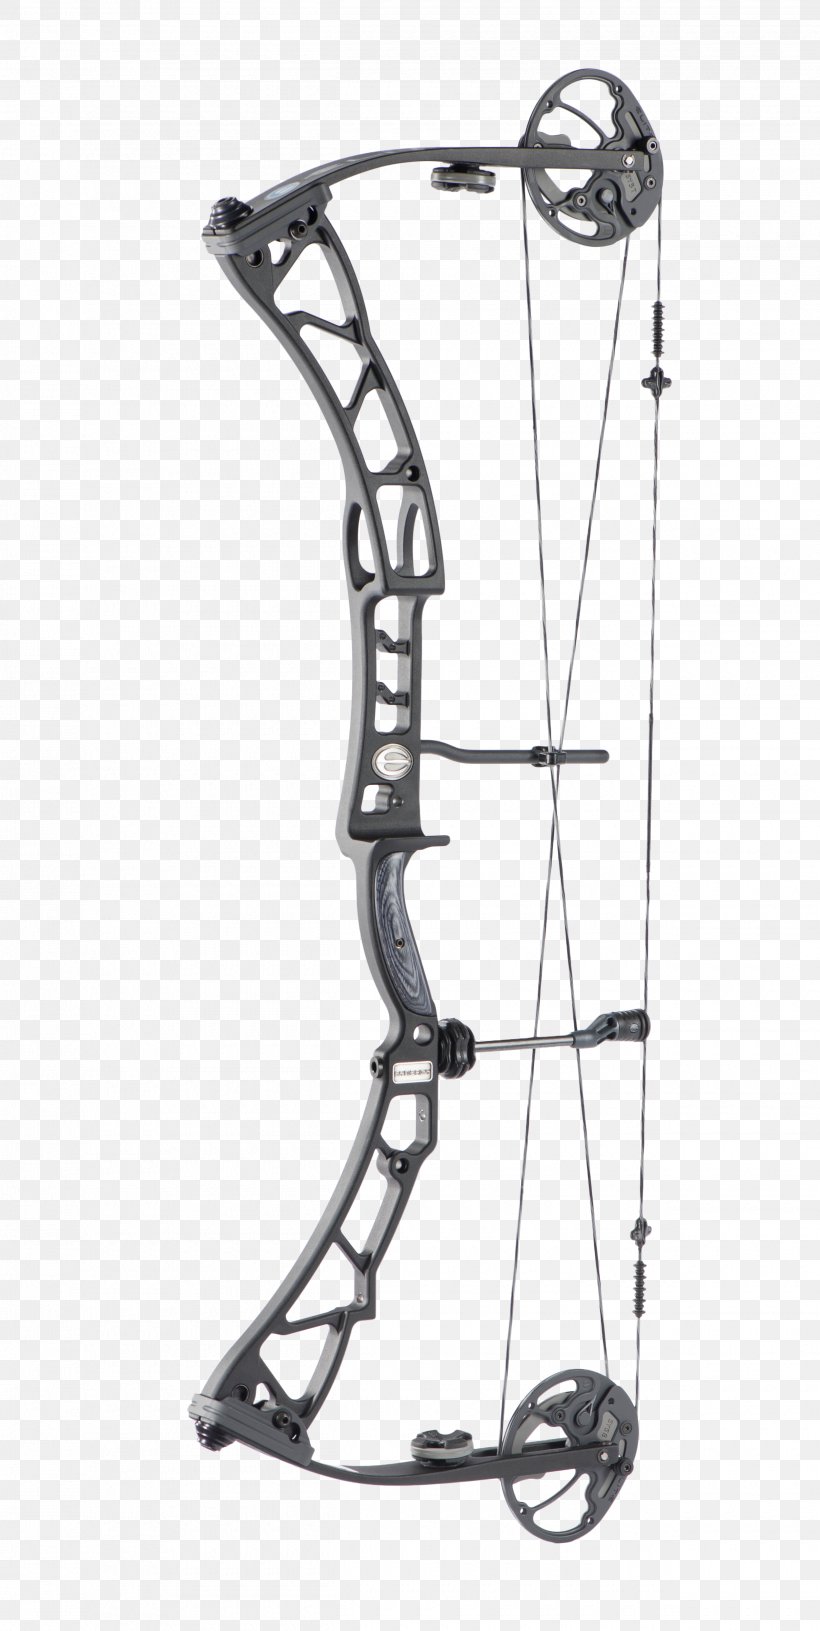 Compound Bows Bow And Arrow Bowhunting Archery, PNG, 2500x4974px, Compound Bows, Archery, Black And White, Bow, Bow And Arrow Download Free